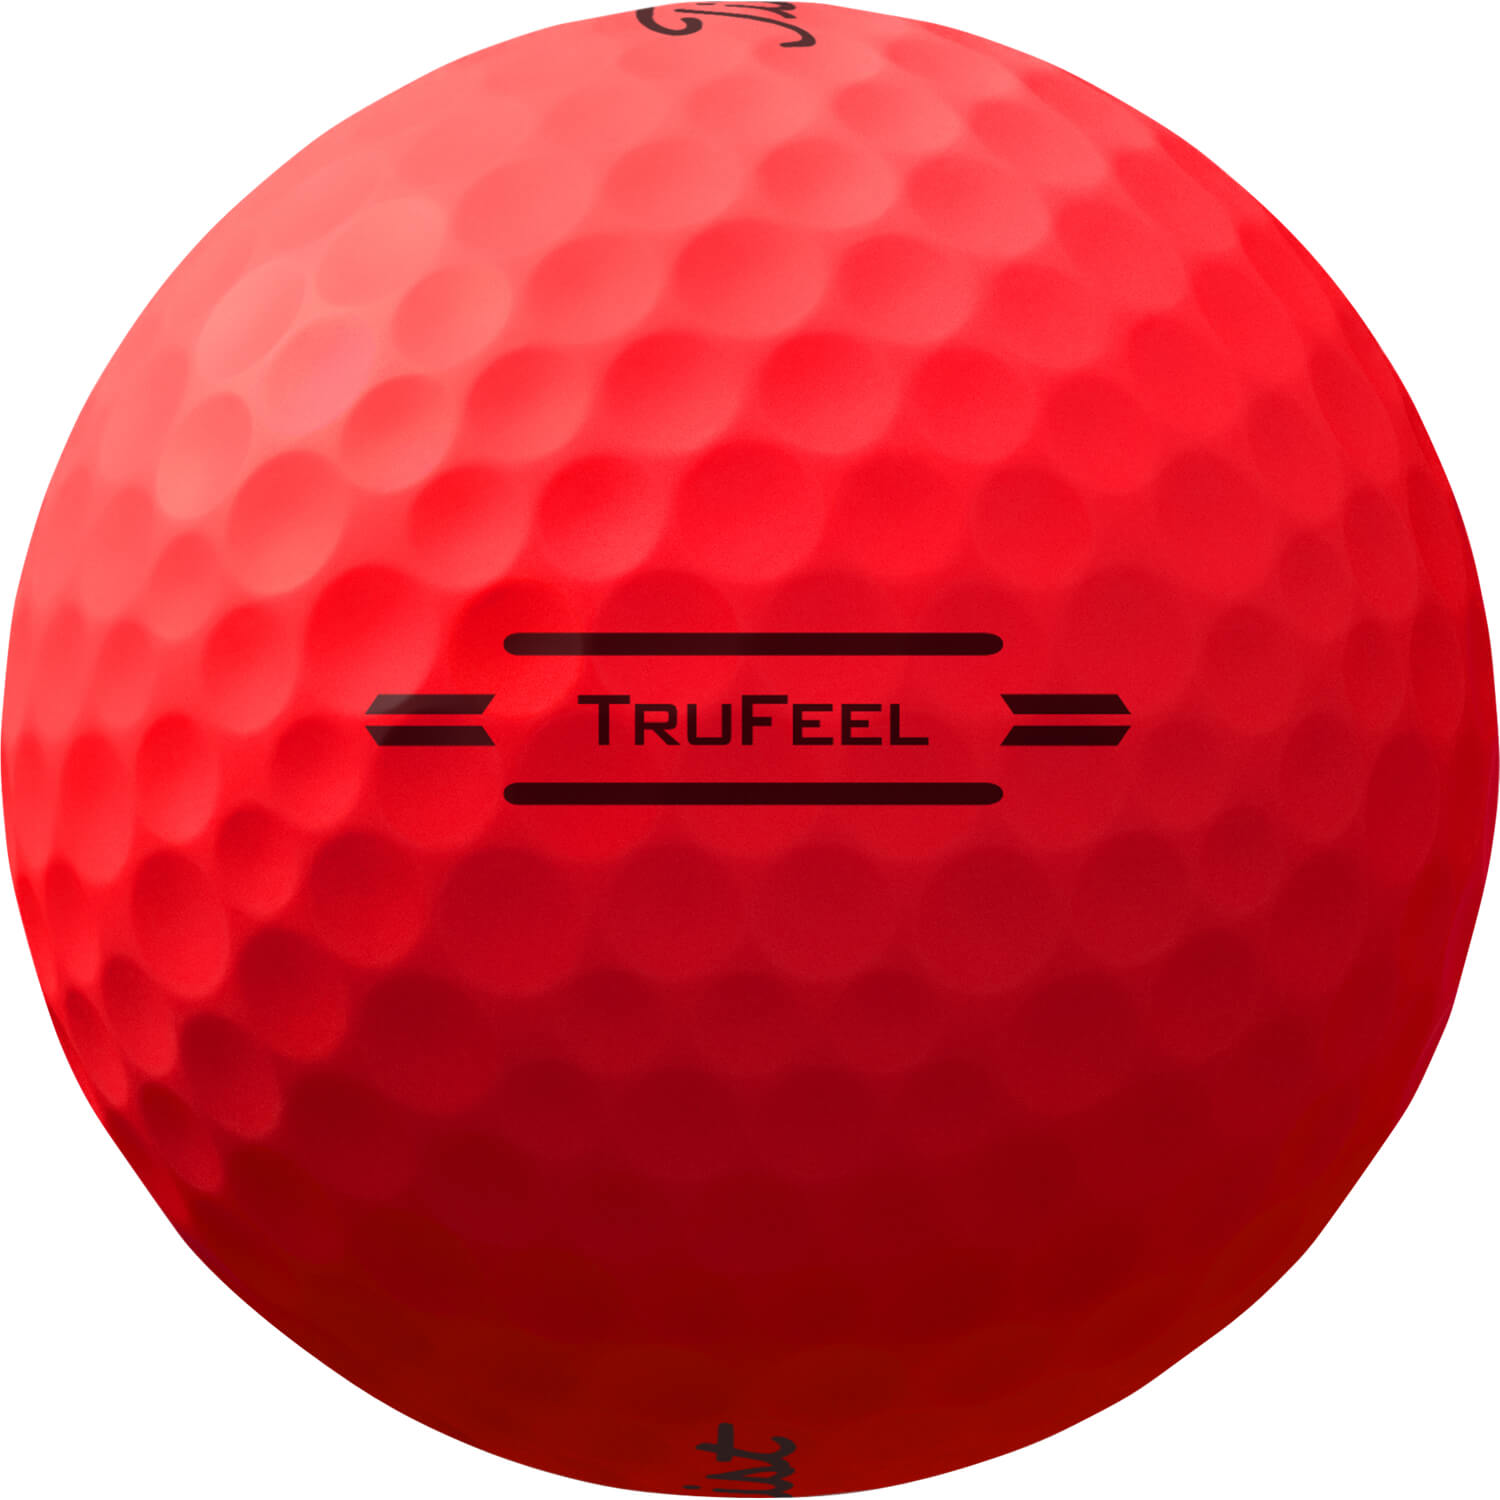 Titleist TruFeel red (22)